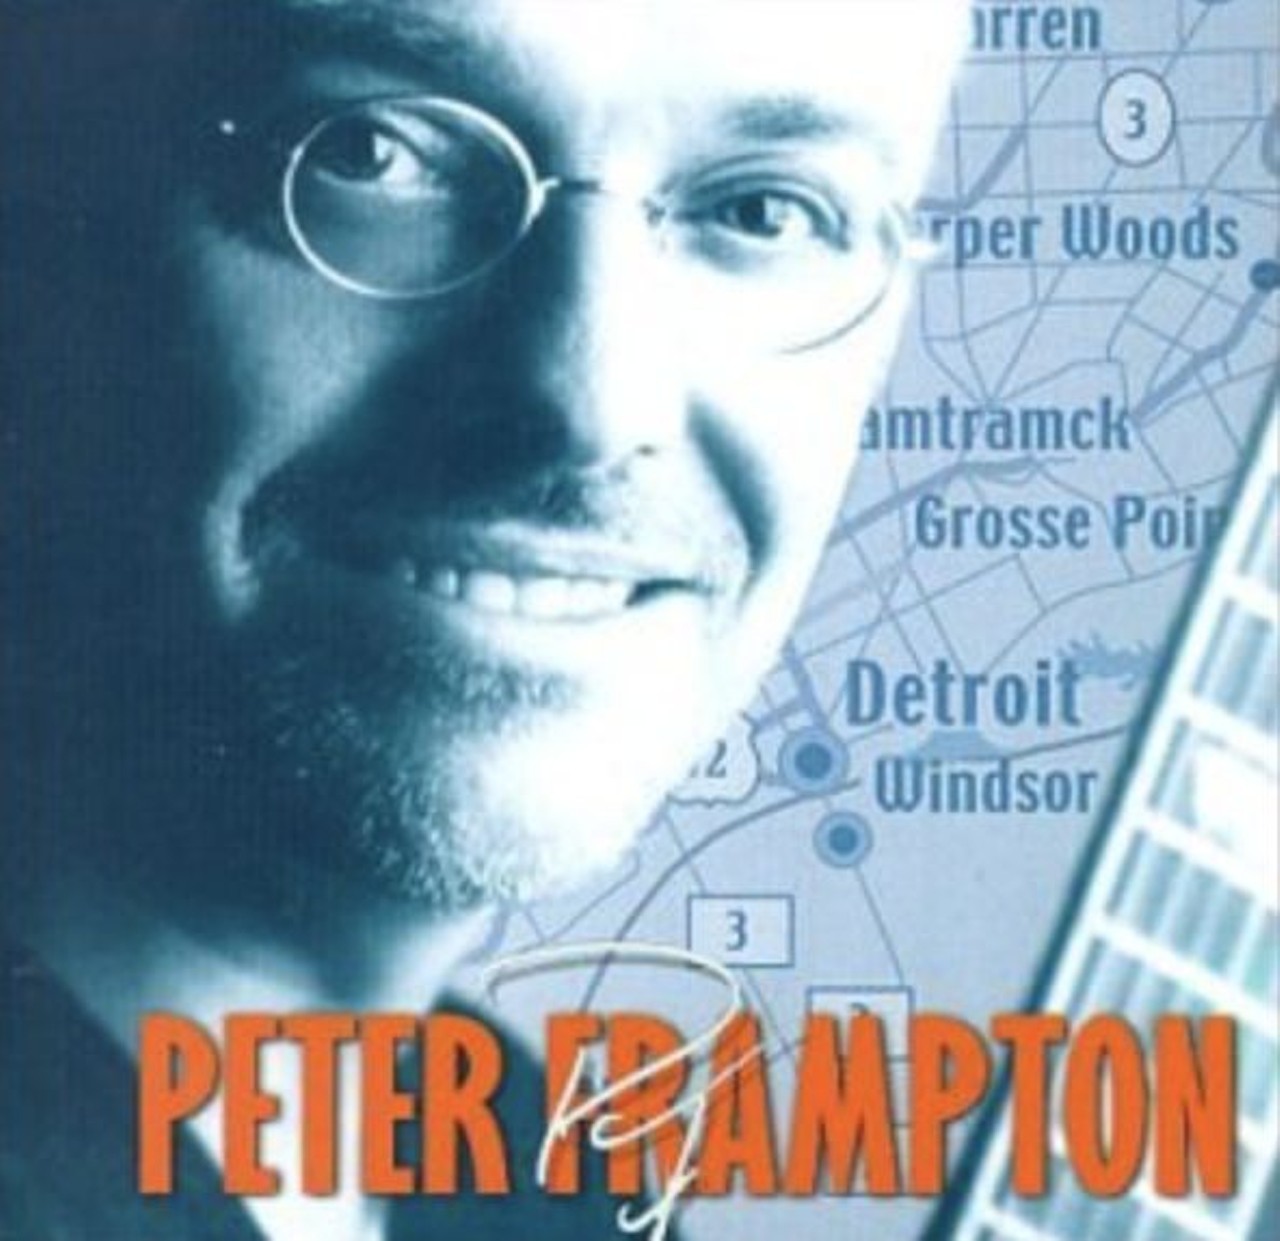  Peter Frampton - Live In Detroit  Recorded July 17, 1999 at The Pine Knob Music Theater. Yeah, he played "Show Me The Way." Yeah, he played "Baby I Love Your Way."